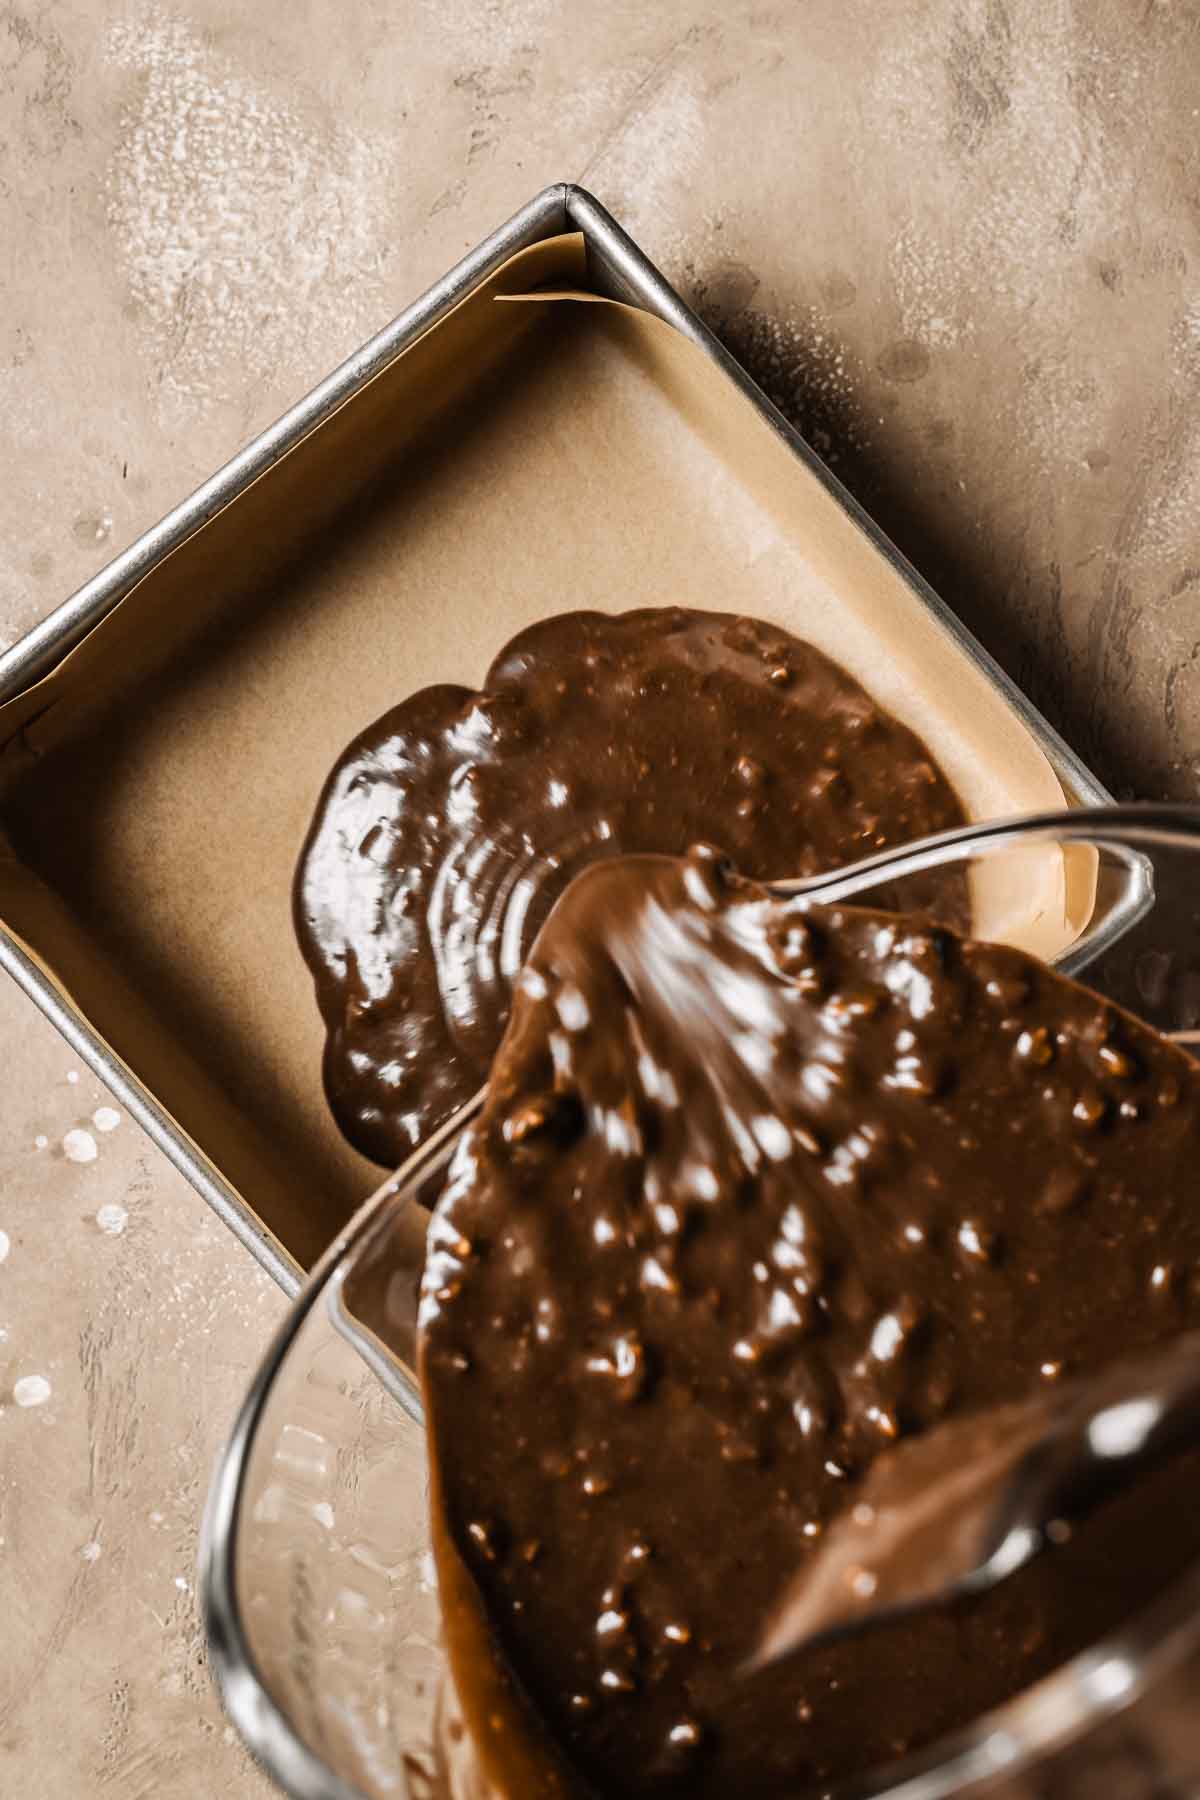 Chocolate walnut cake batter being poured from a glass mixing bowl into a parchment lined square pan.